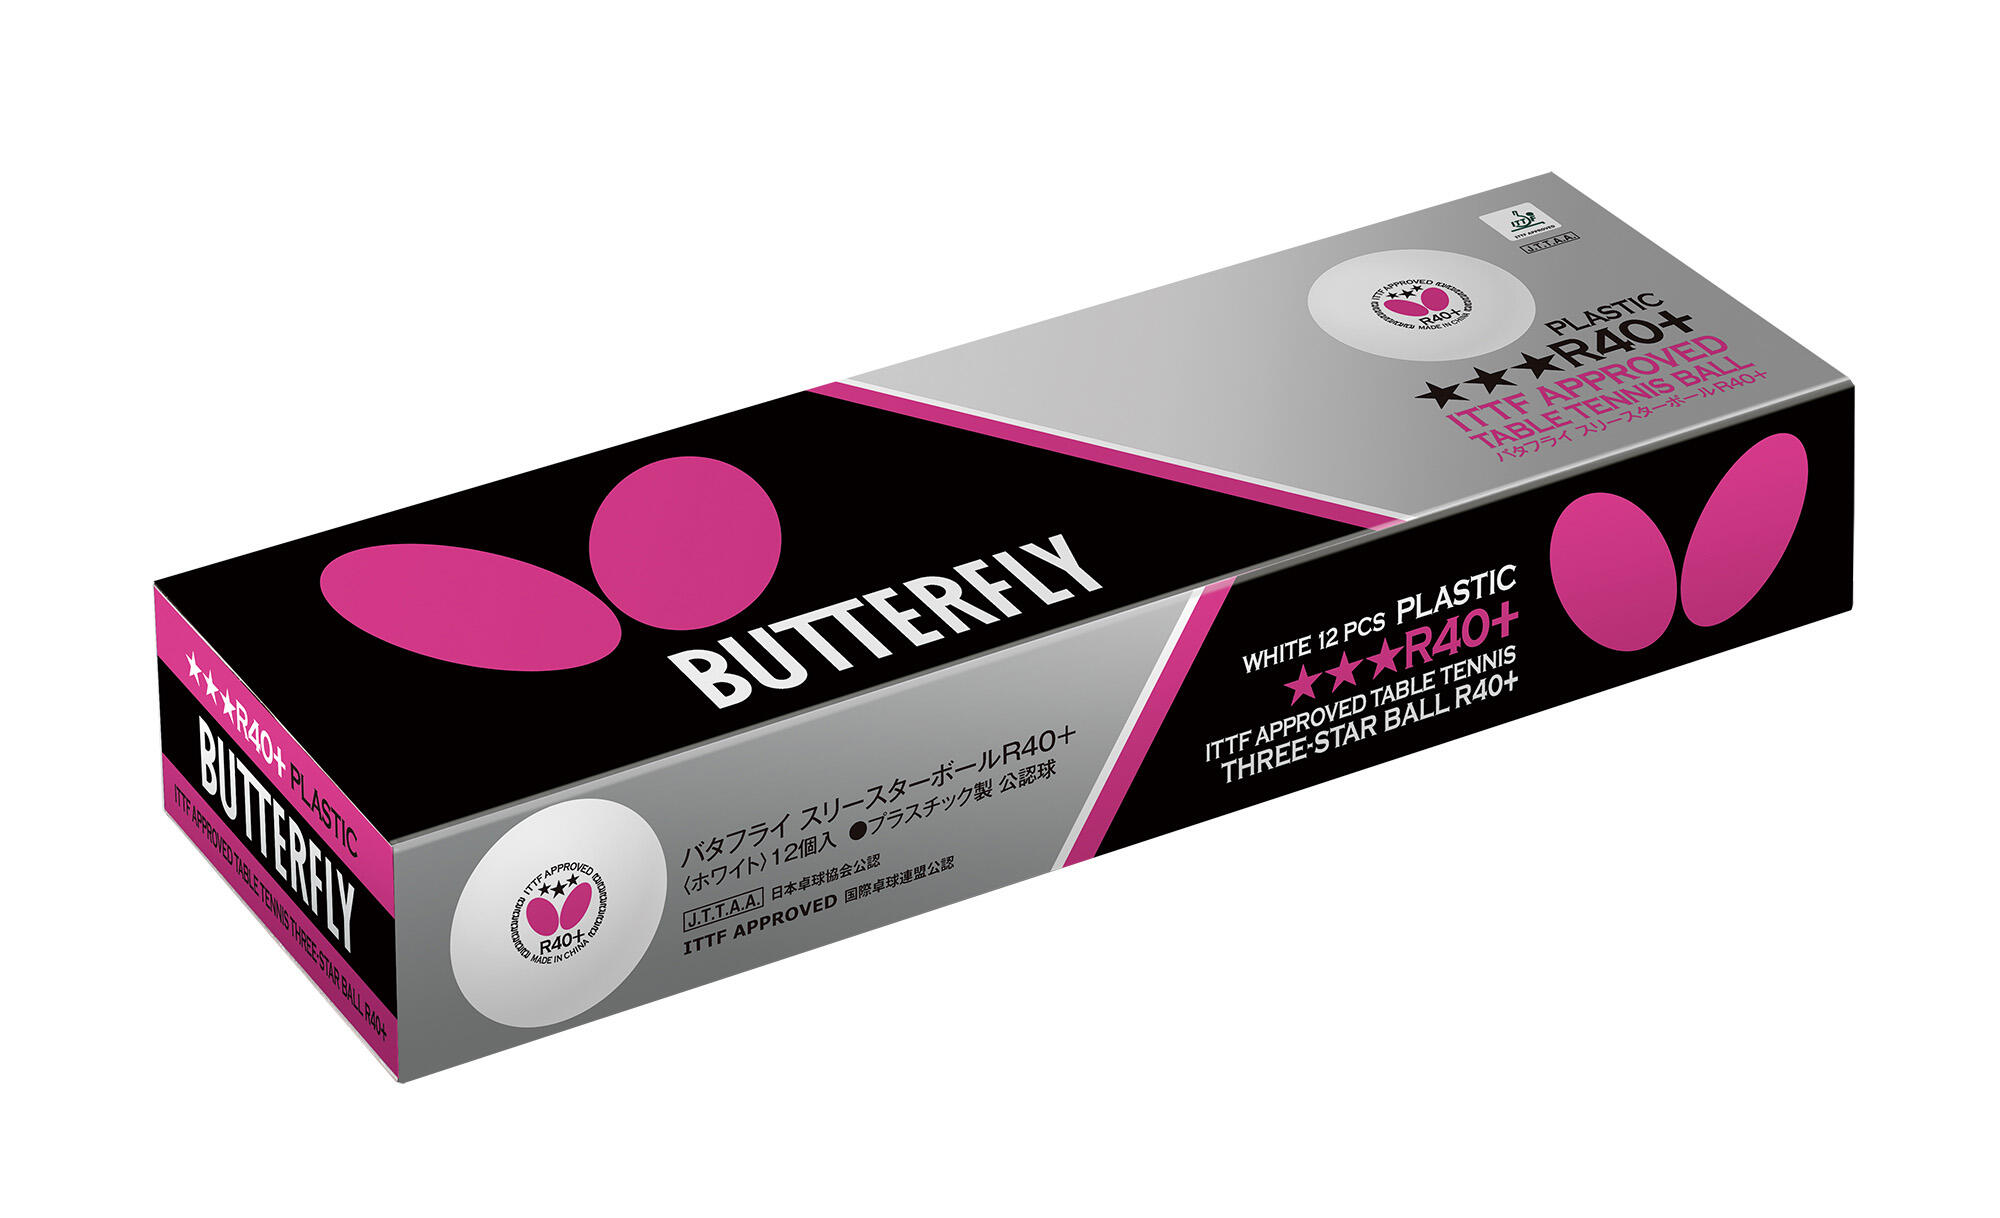 BUTTERFLY Butterfly R40+ Three Star Ball (Pack of 12)